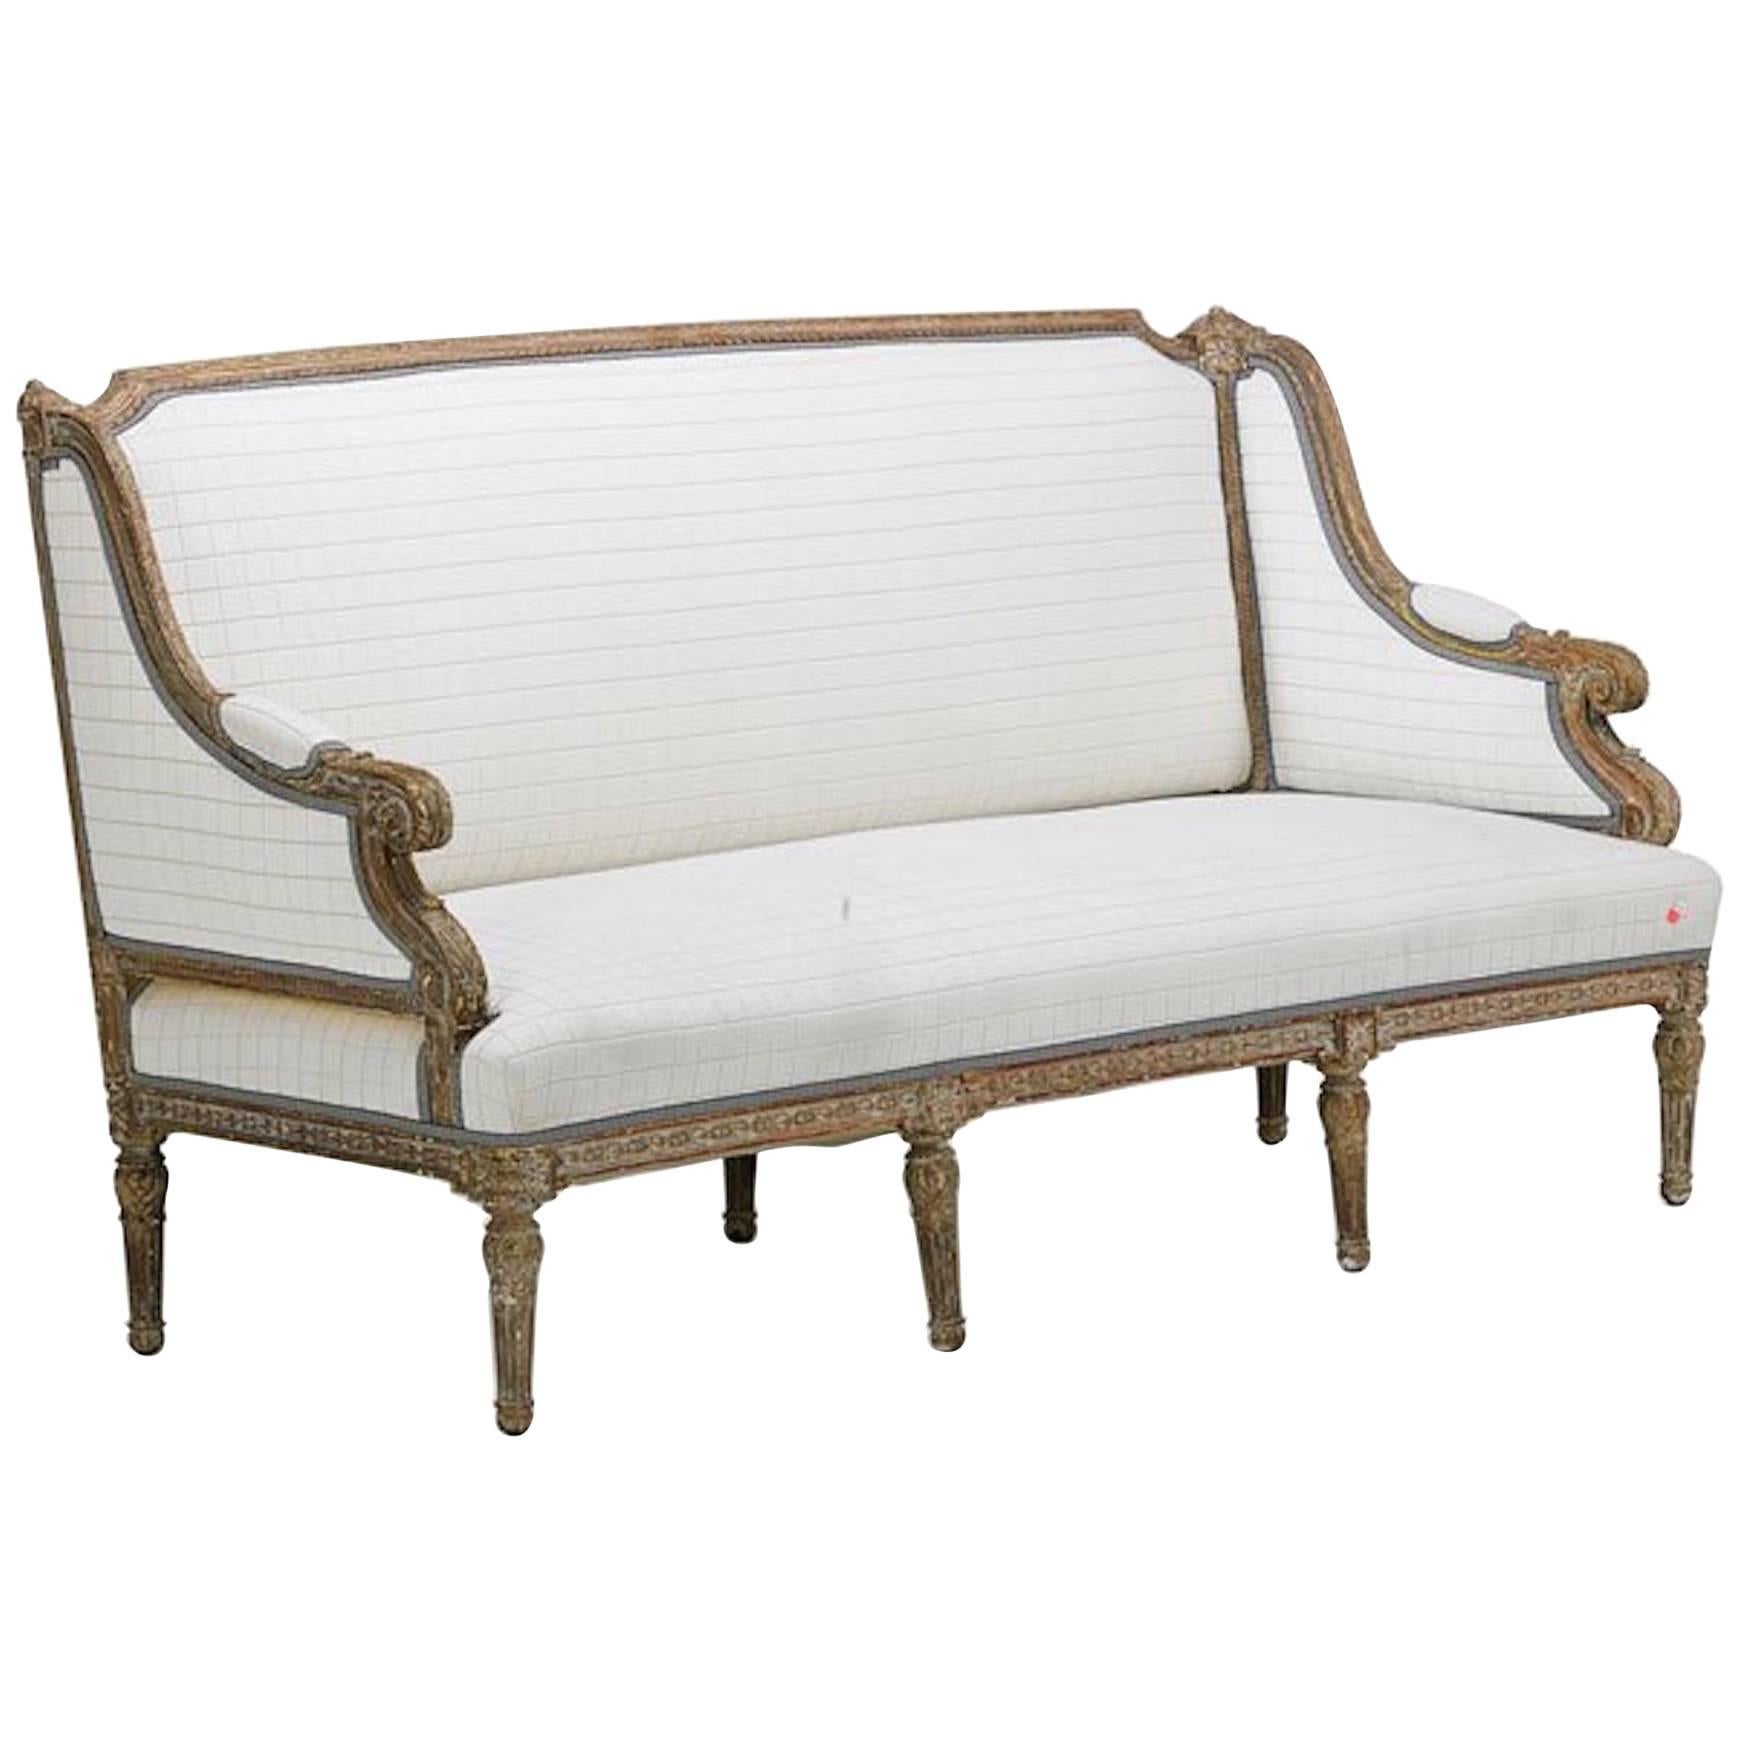 Exquisite 19th Century Louis XVI Style Giltwood Sofa with Clarence House Fabric